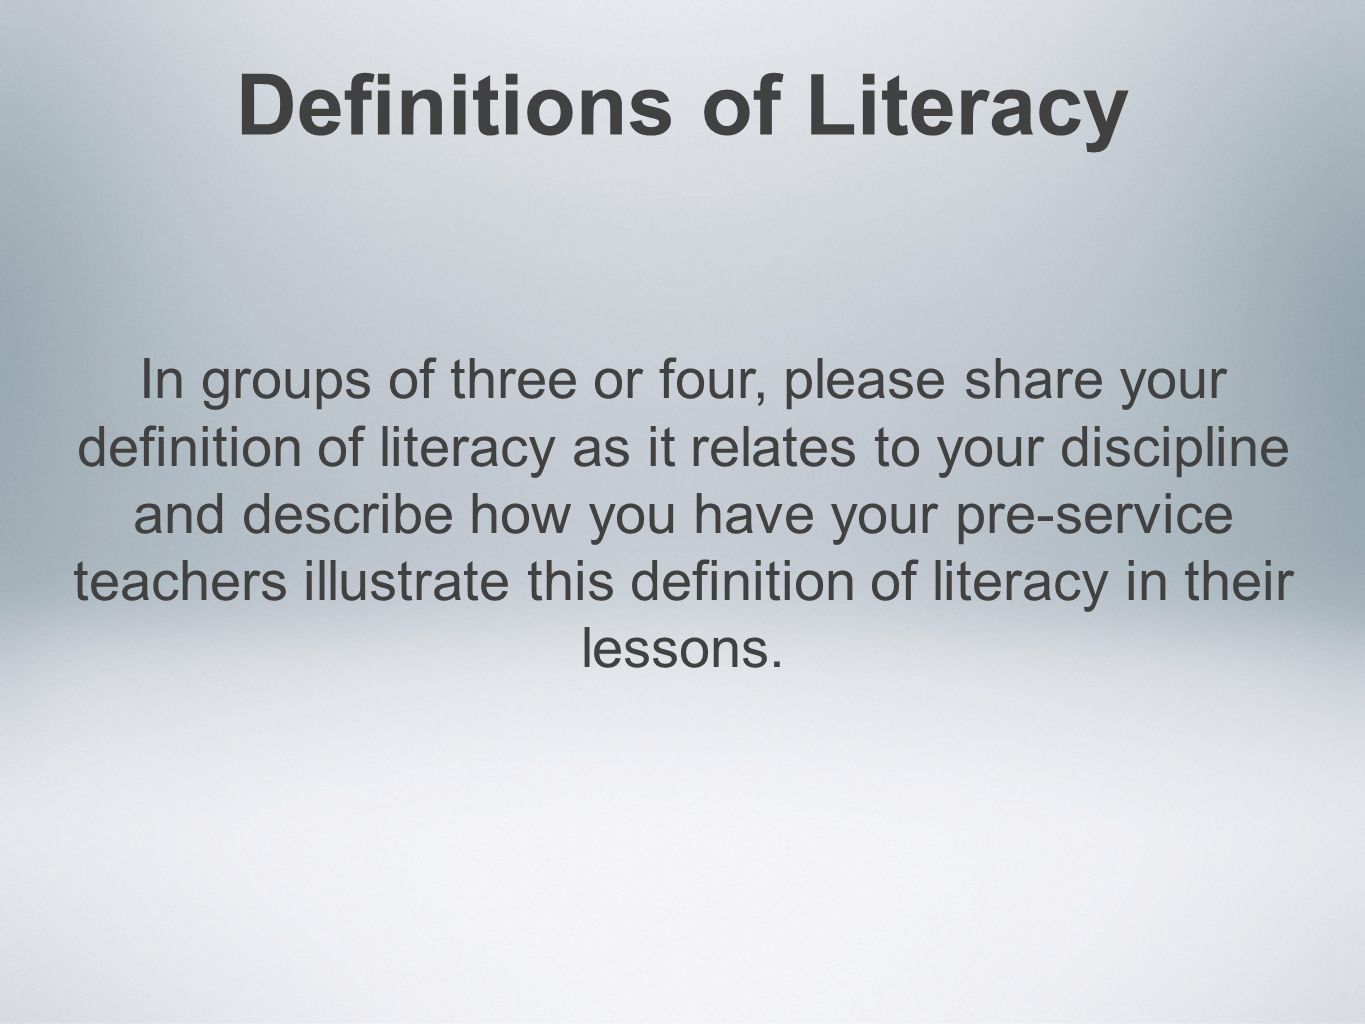 Definitions of Literacy In groups of three or four, please share your definition of literacy as it relates to your discipline and describe how you have your pre-service teachers illustrate this definition of literacy in their lessons.